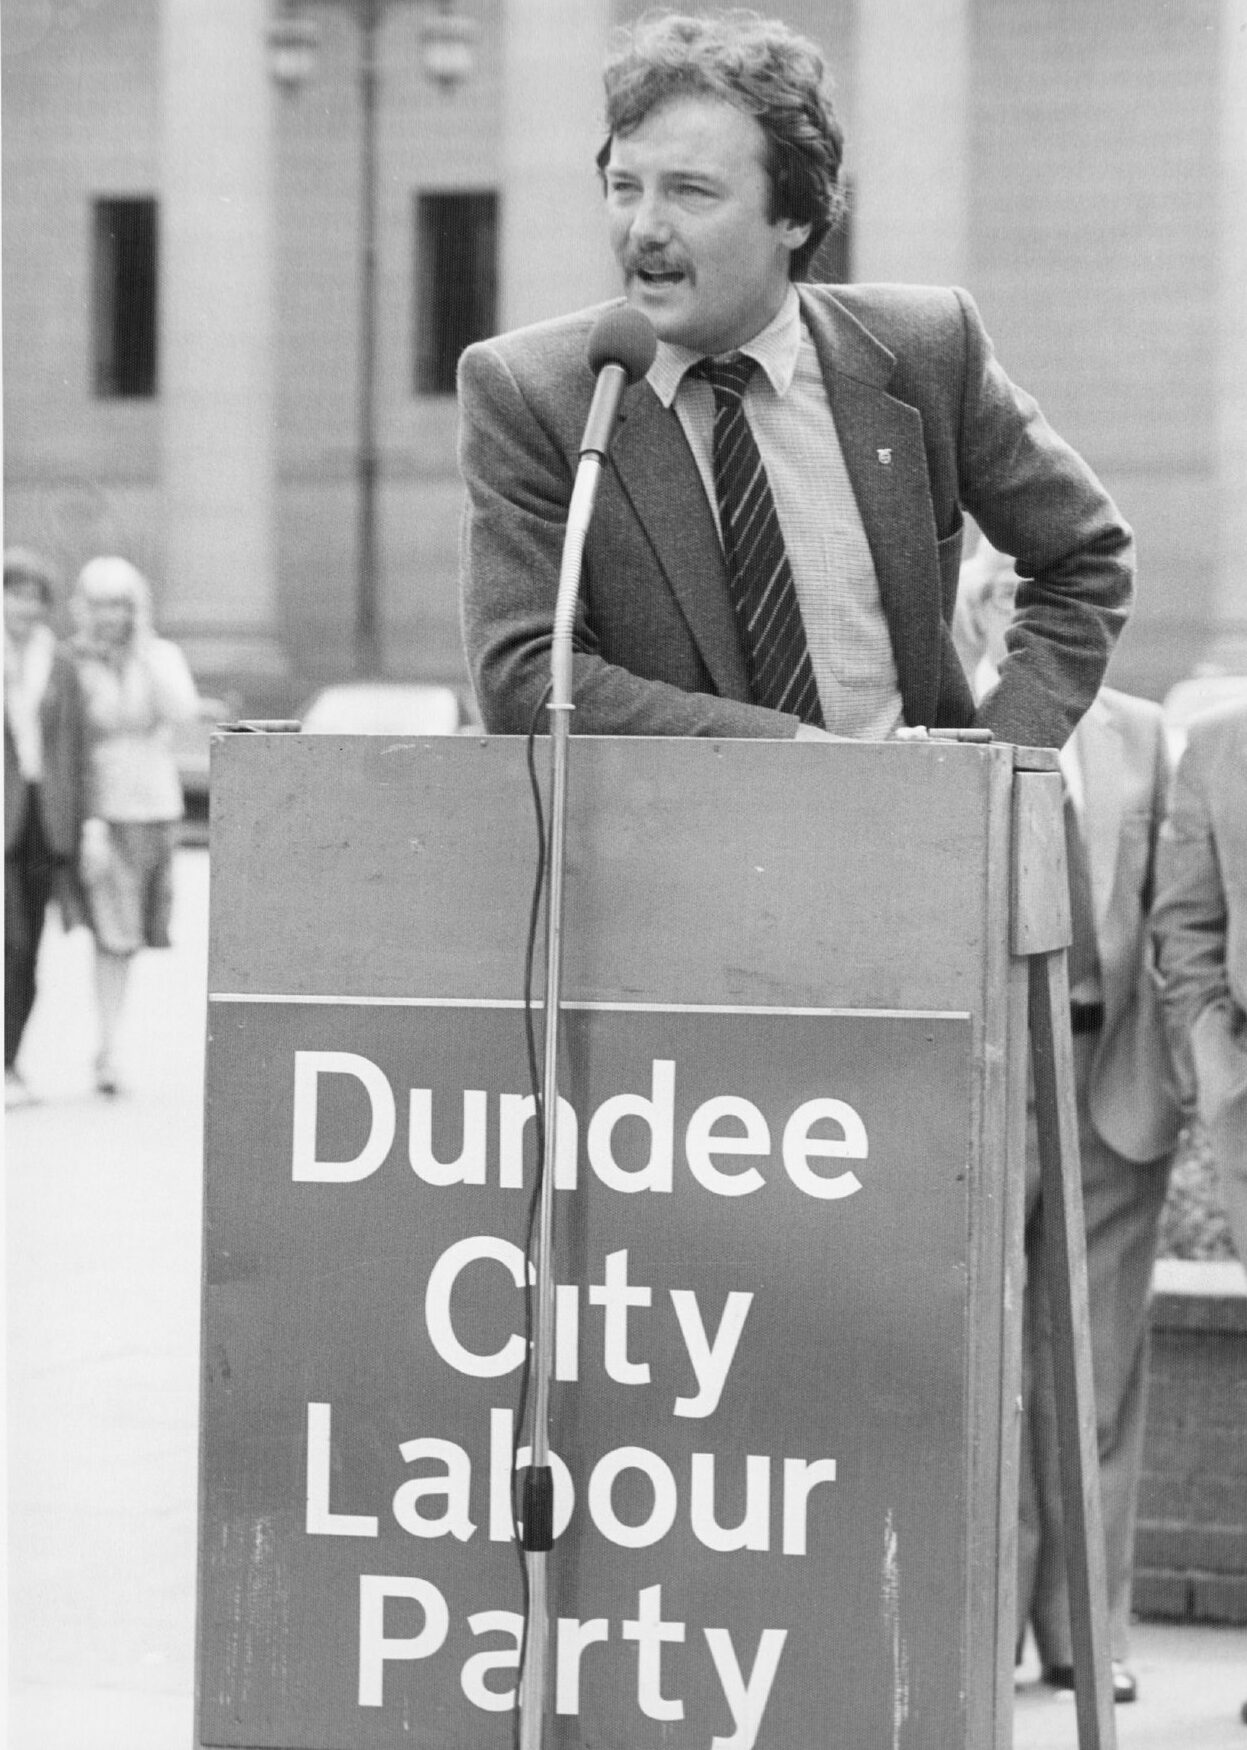 George Galloway at a podium in Dundee in the 80s.